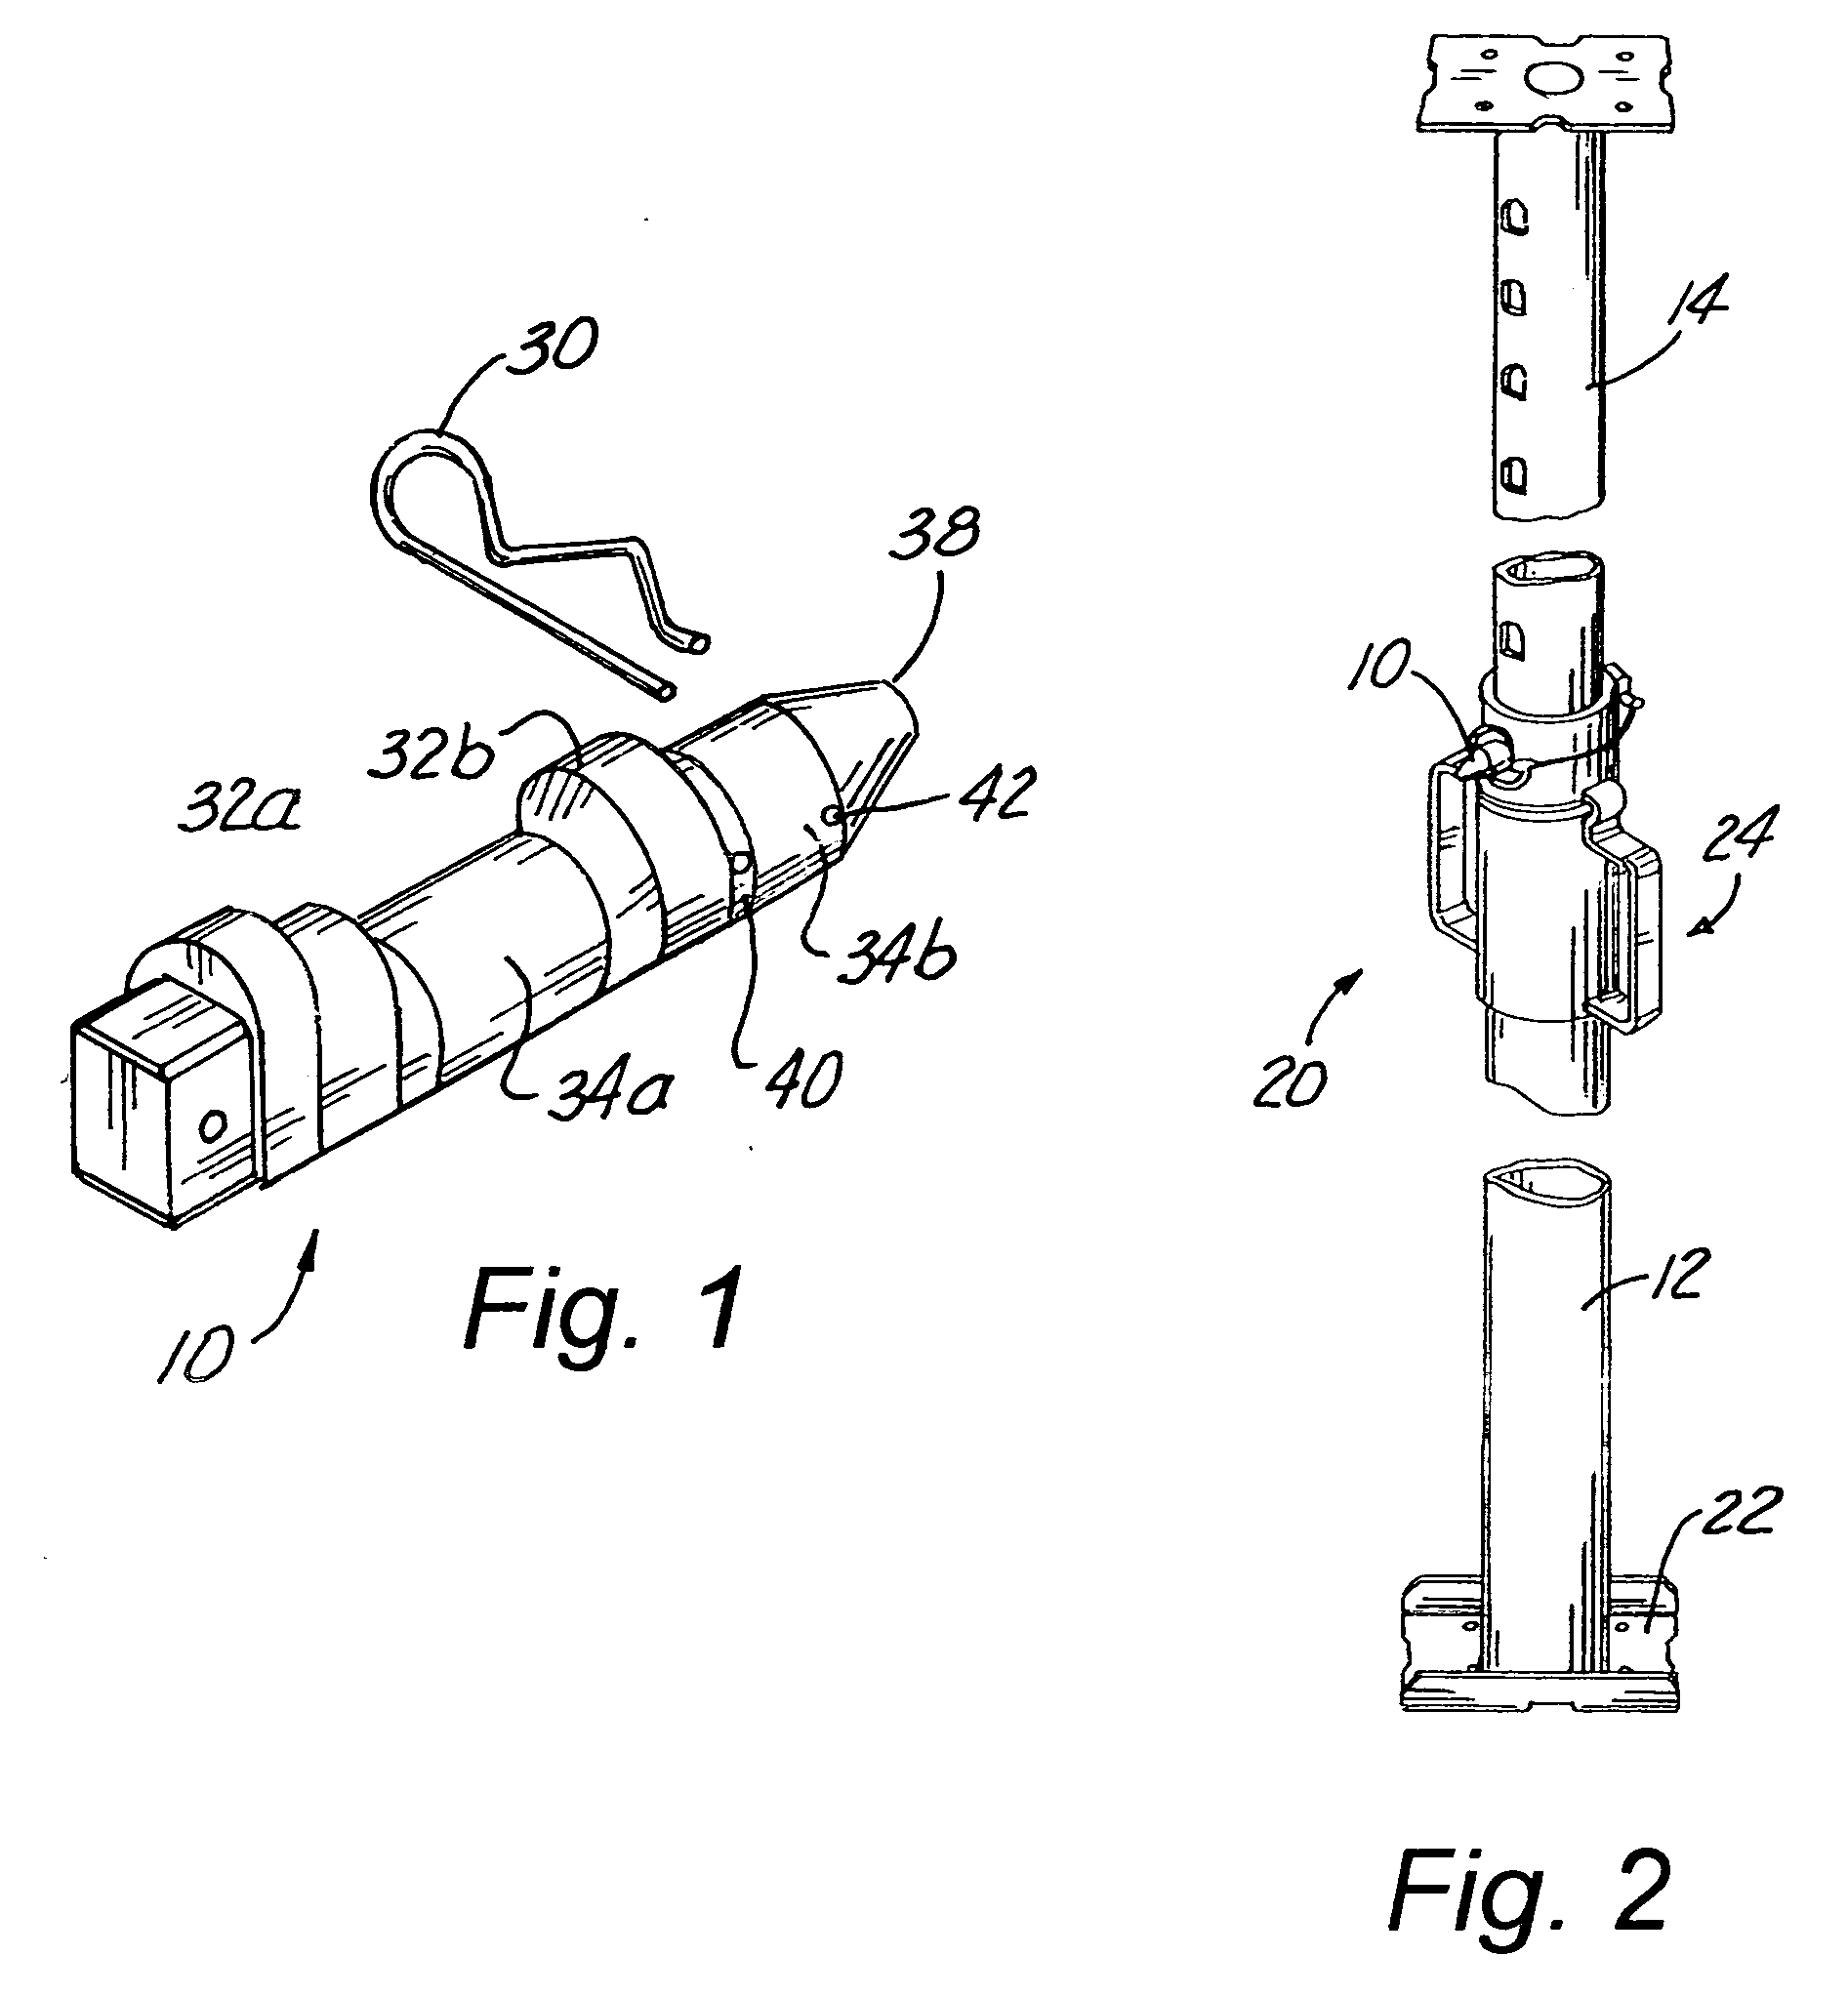 Load release pin for concrete shoring apparatus